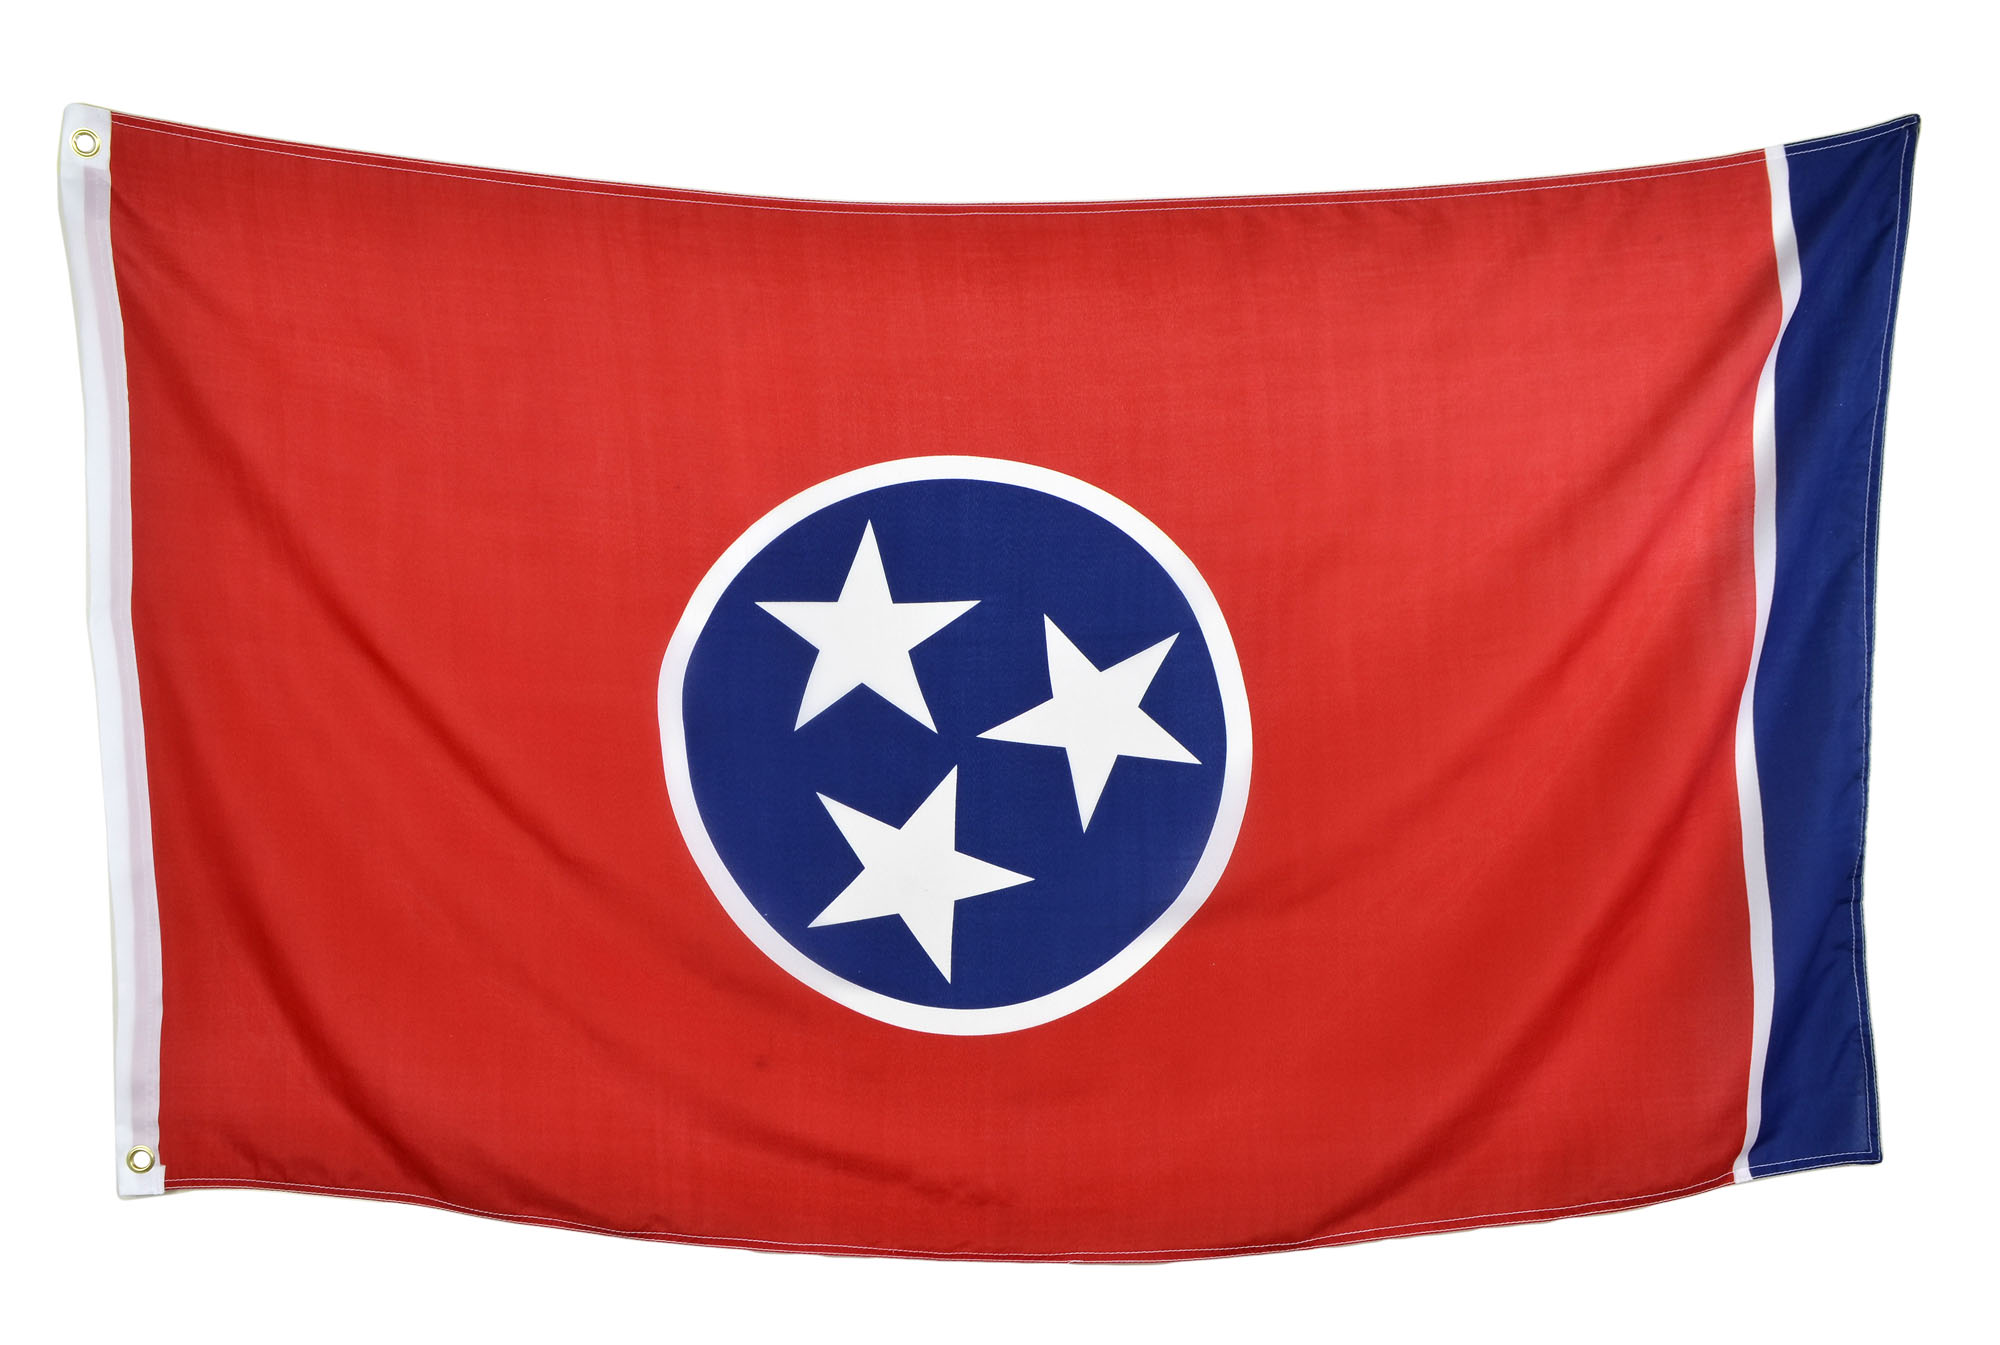 Shop72 Tennessee State Flags 3x5' Sturdy Polyester Brass Grommets Double Stitched Tennessee Flag